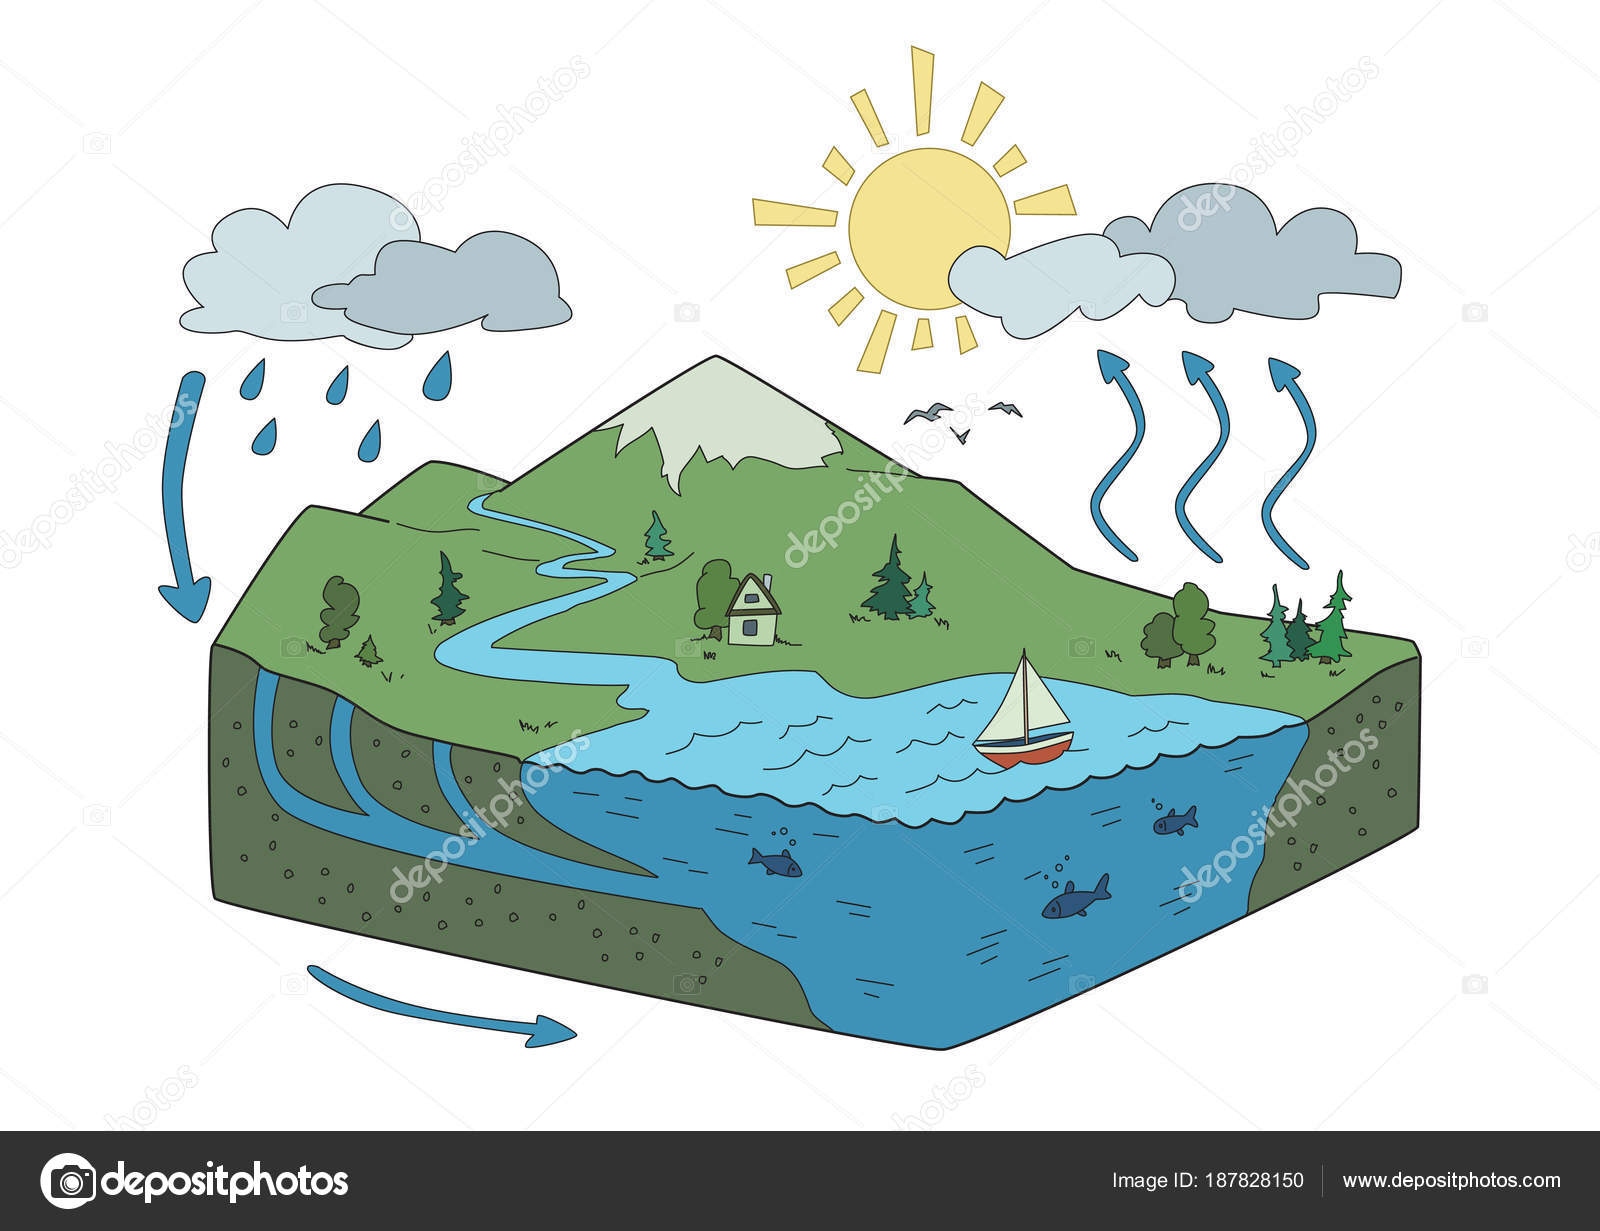 The Global Water Cycle